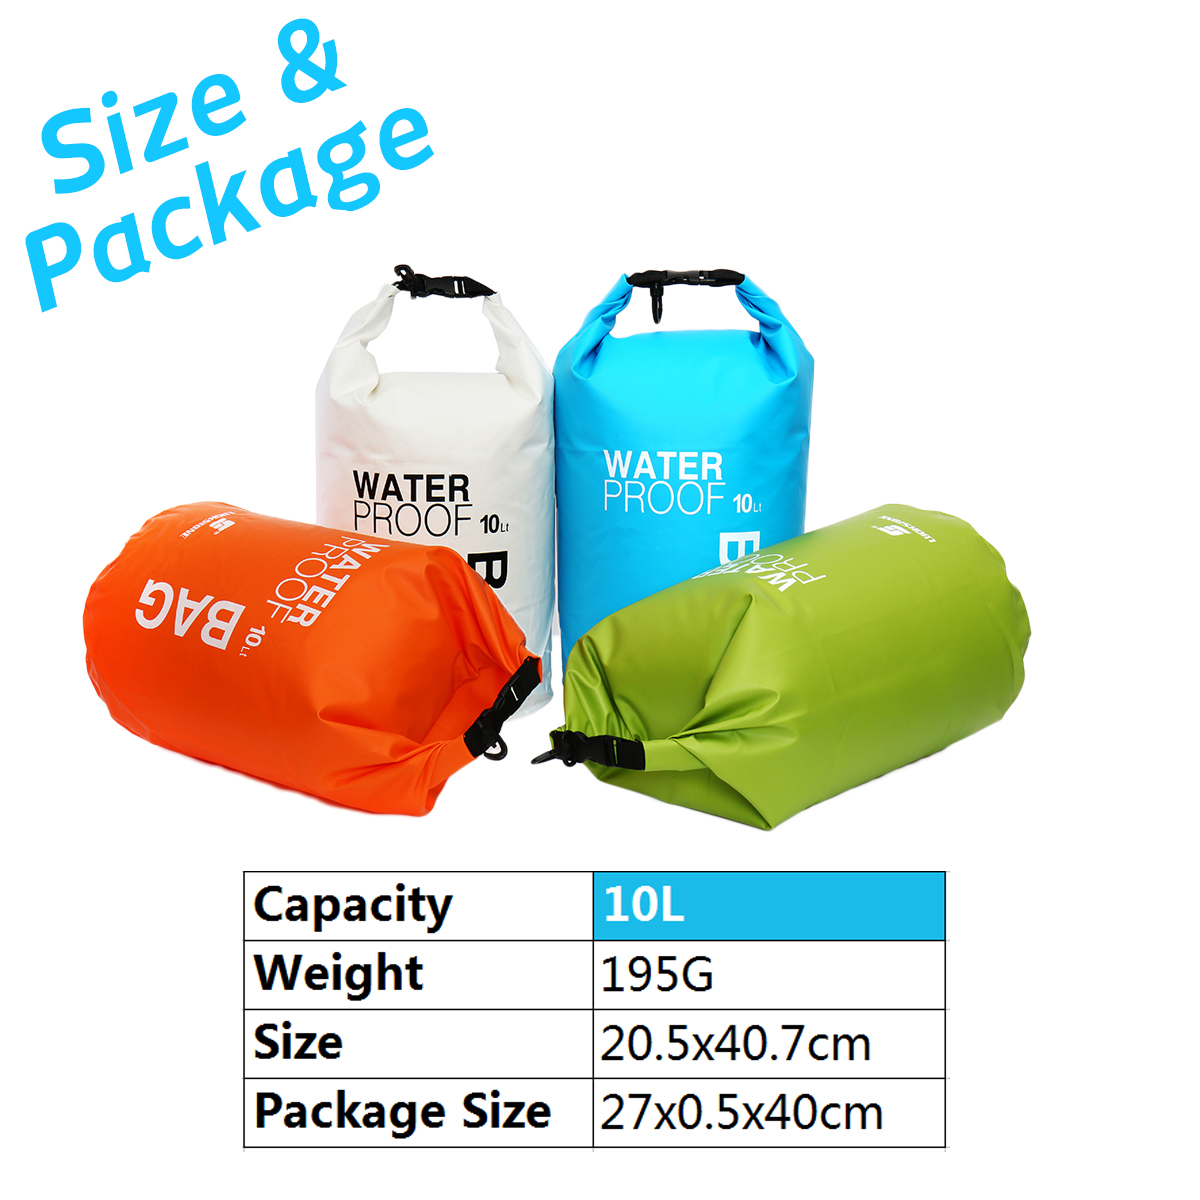 10L-Outdoor-Swimming-Air-Inflation-Floating-Mobile-Phone-Camera-Storage-PVC-Waterproof-Bag-1820807-15